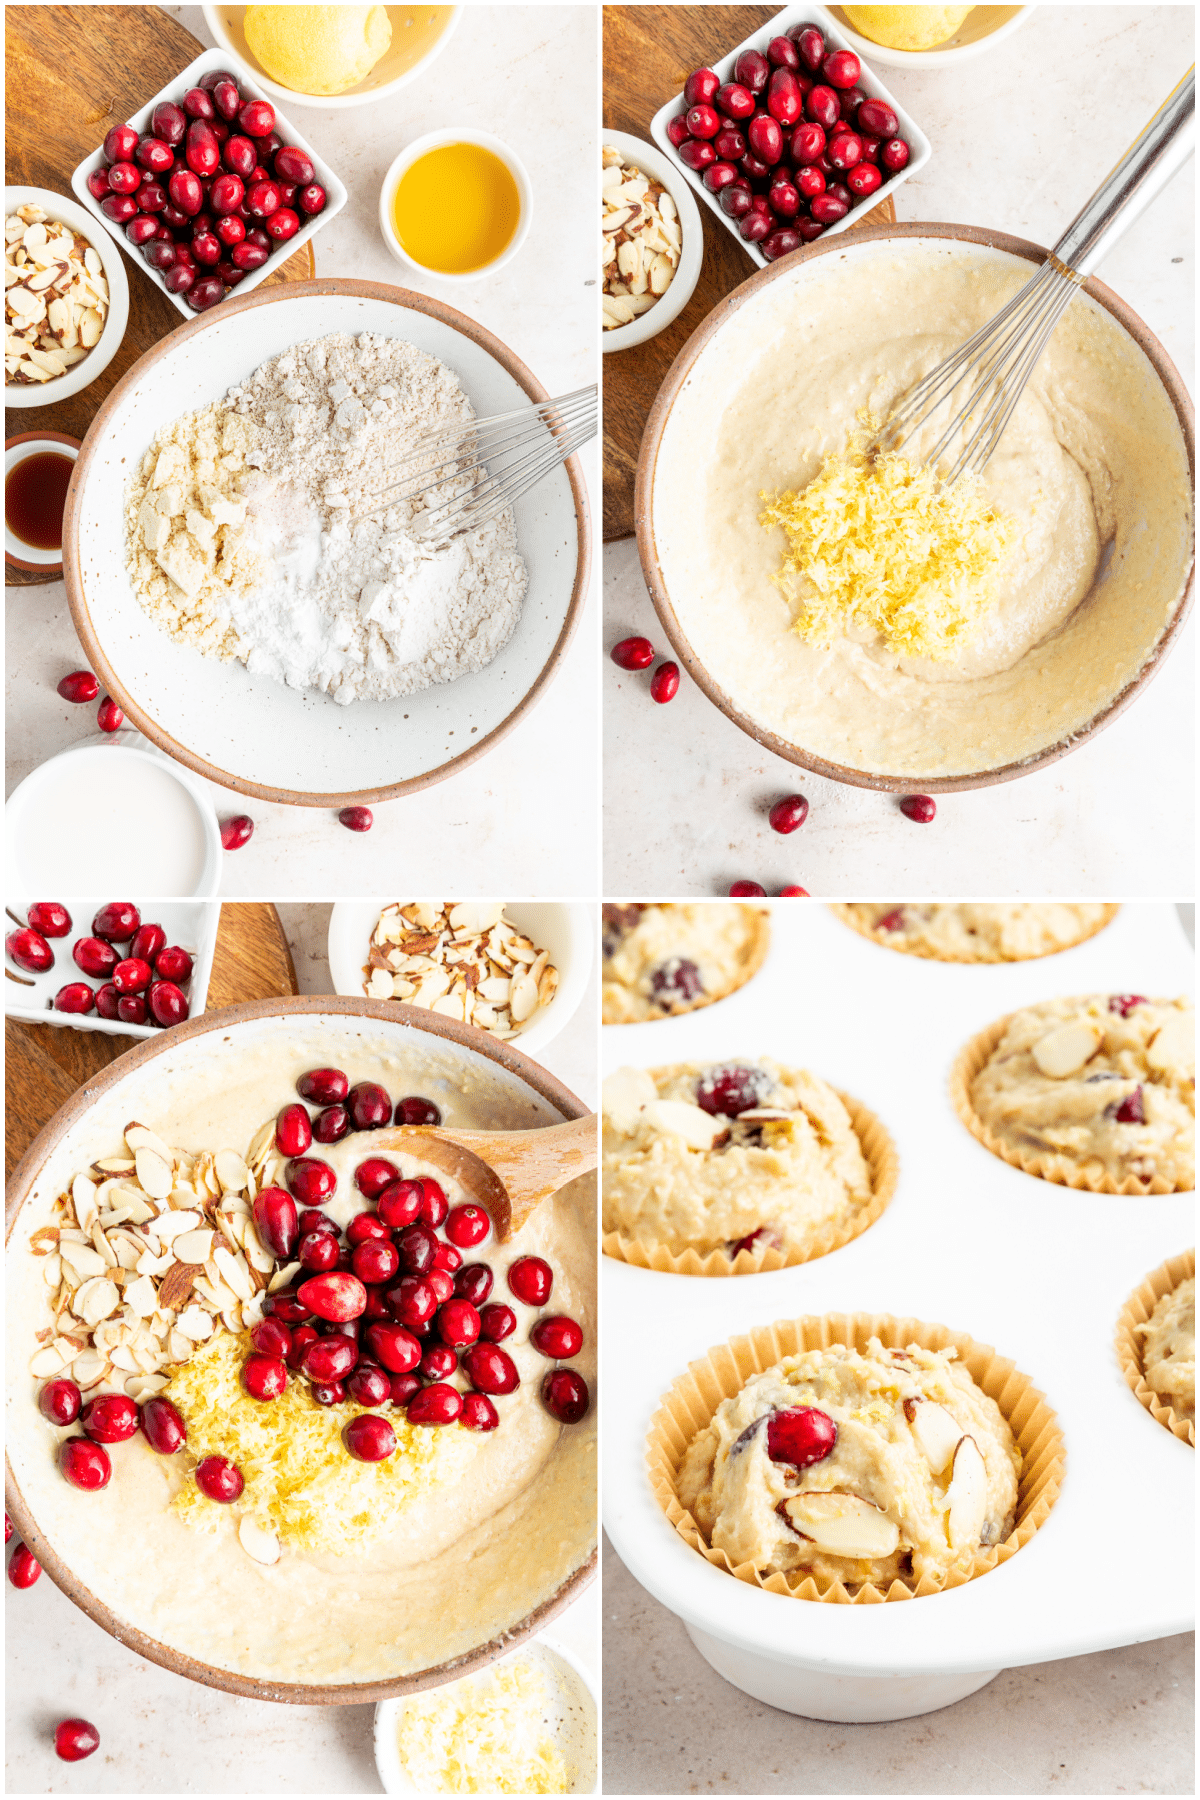 A four image collage showing how to make cranberry lemon muffins: stir the flours, add the wet ingredients, stir in the cranberries and almond slices, transfer to muffin tin and bake.